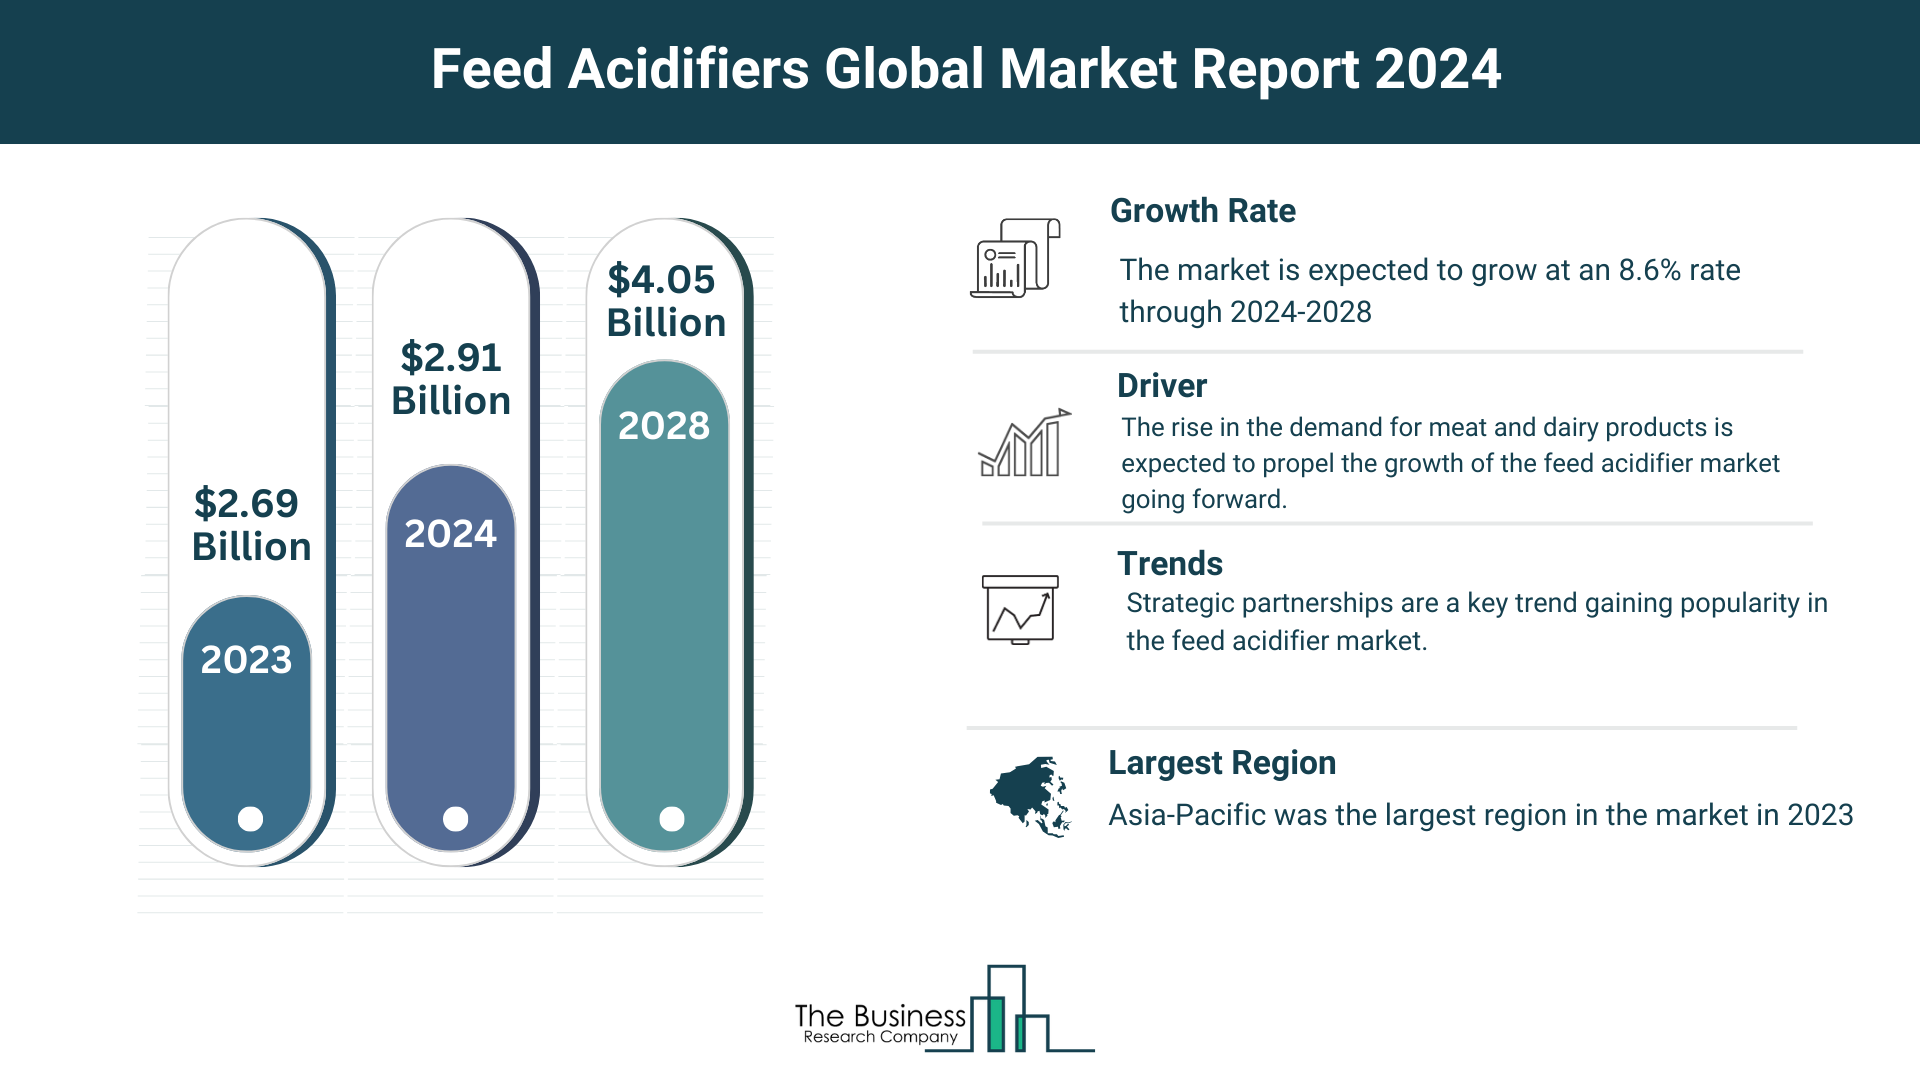 Global Feed Acidifiers Market Analysis: Size, Drivers, Trends, Opportunities And Strategies